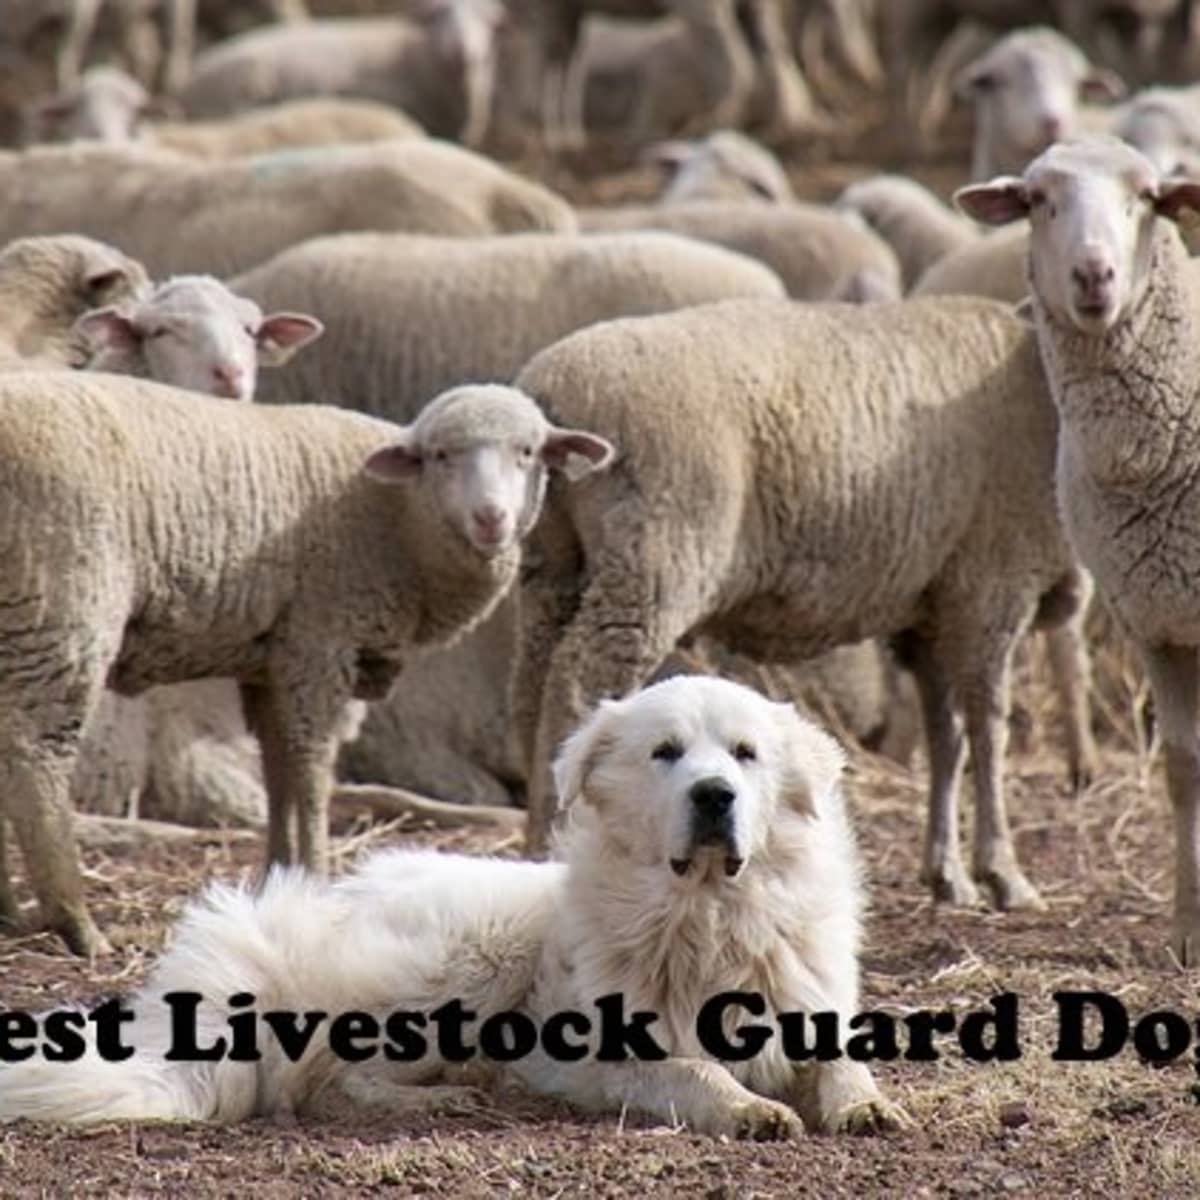 which dog breed is used for rounding up sheep